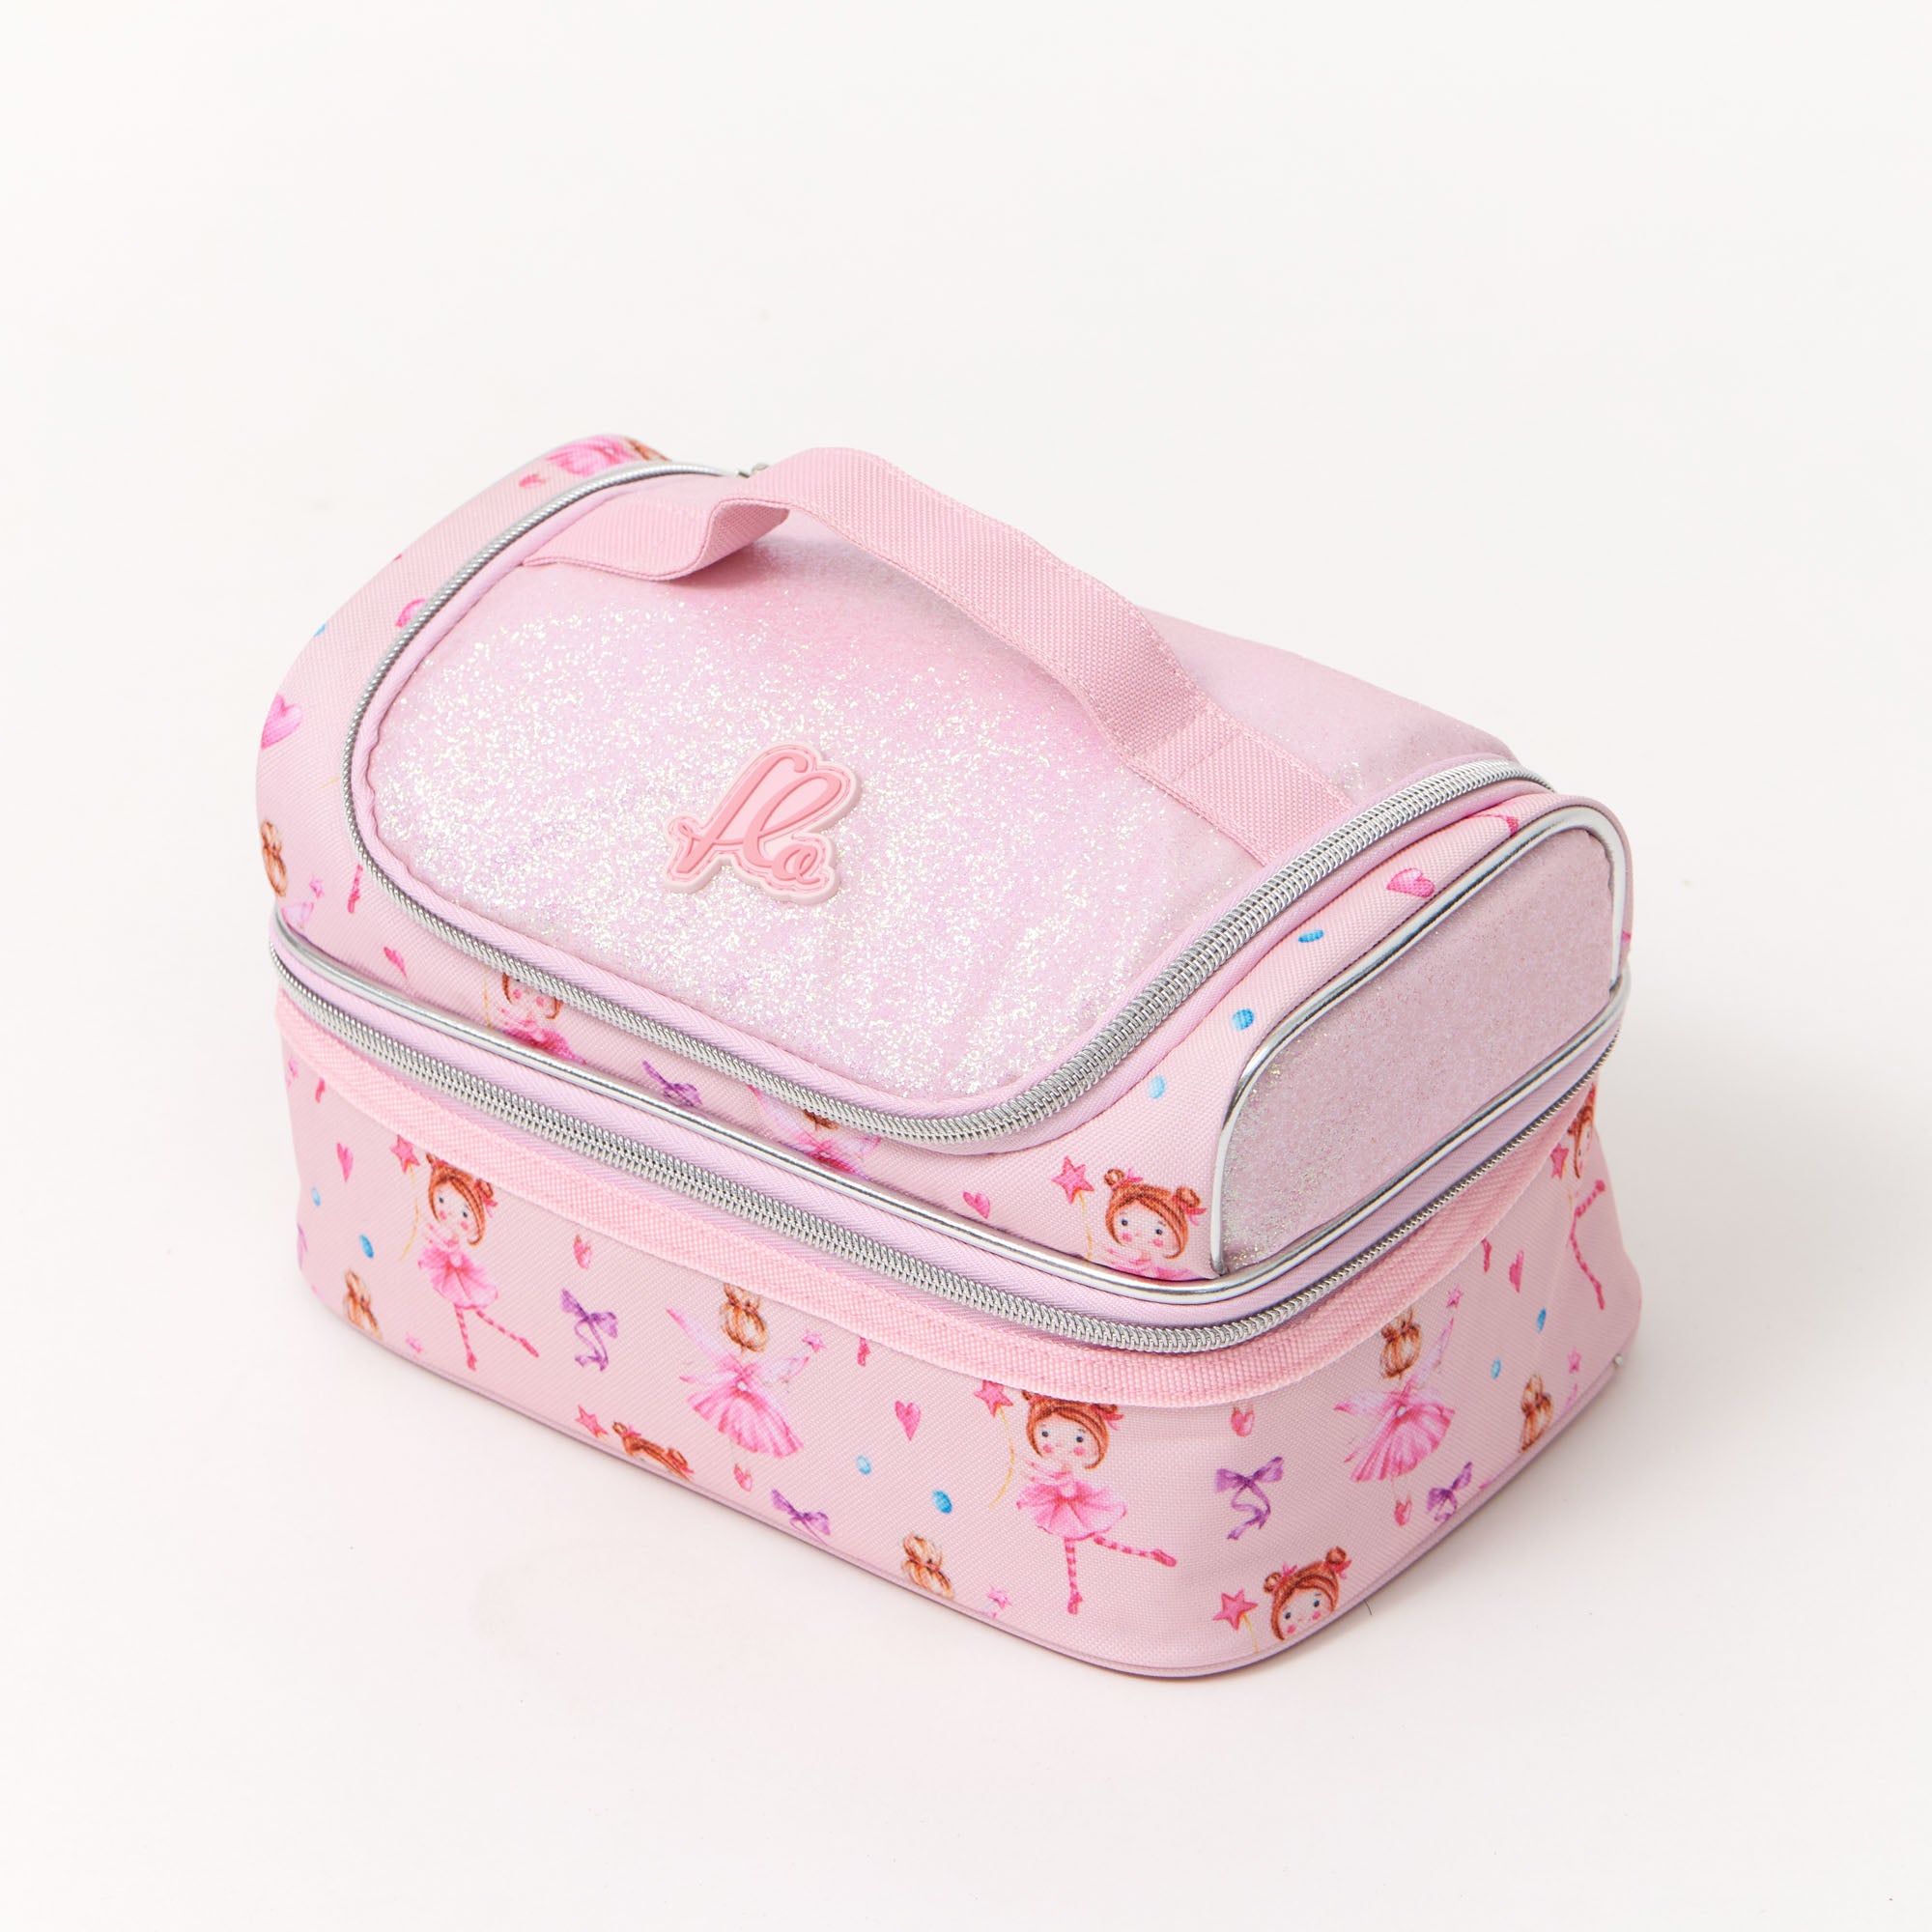 Back to School Ballerina Lunch Box with Glitter Finish